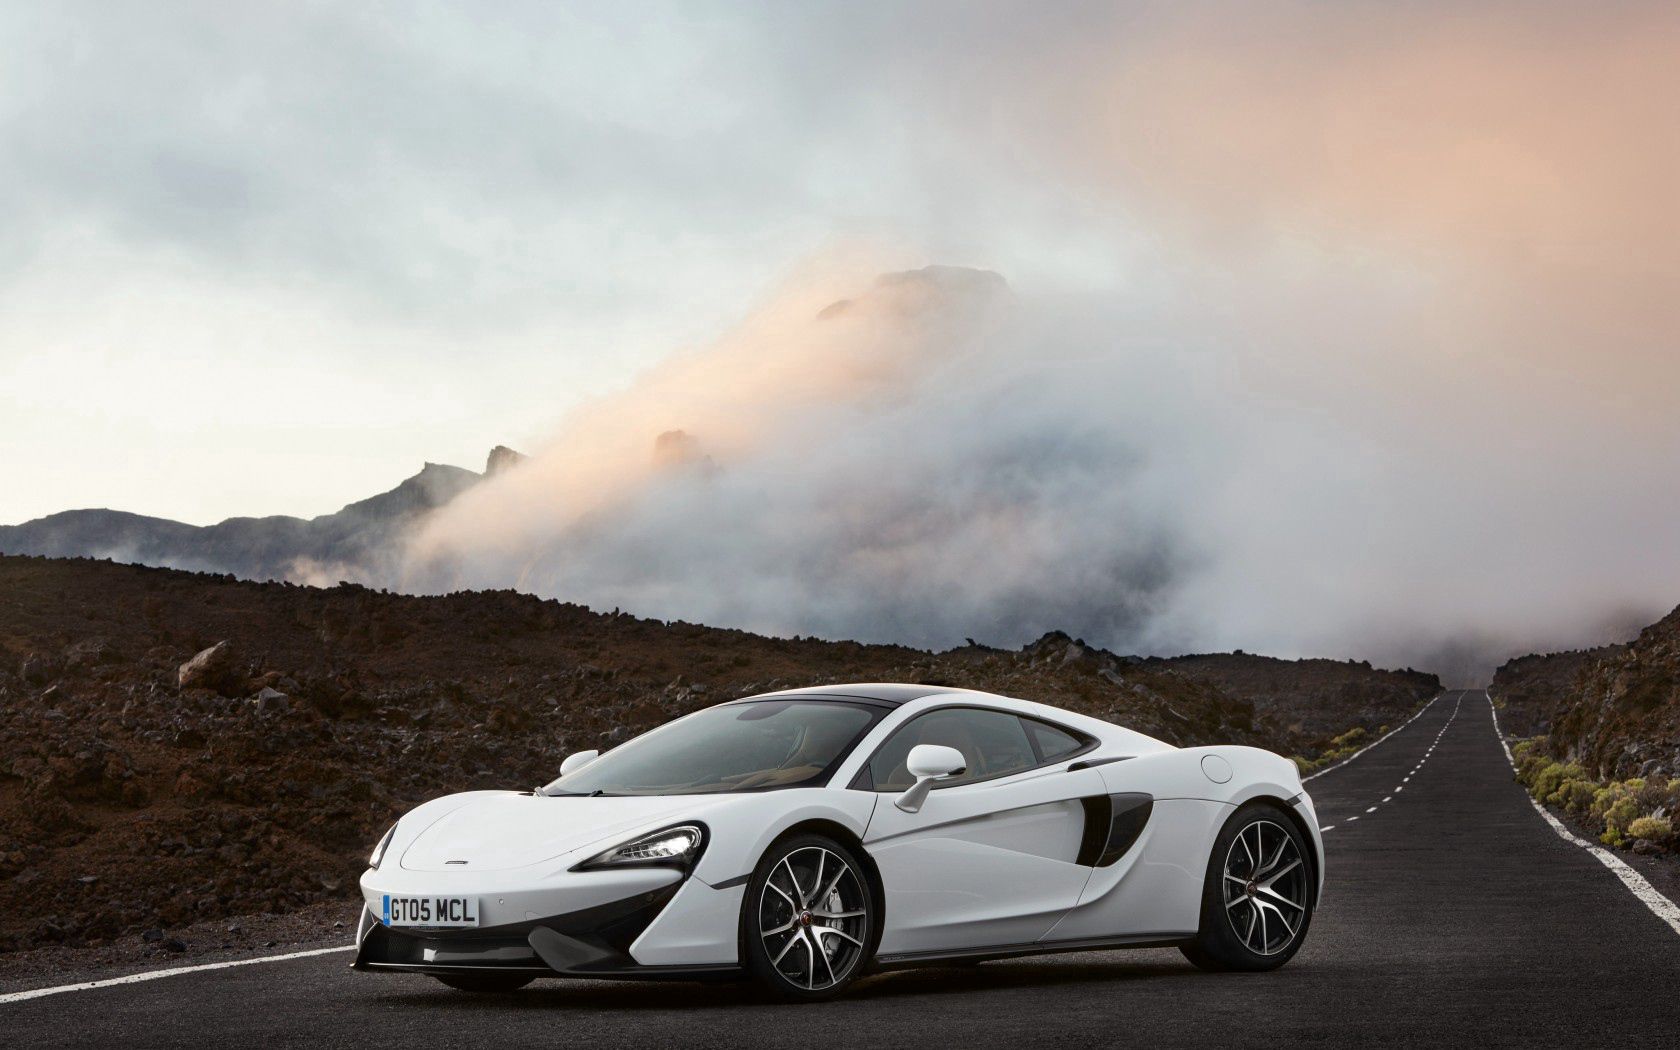 570gt, mclaren, cars, white, side view